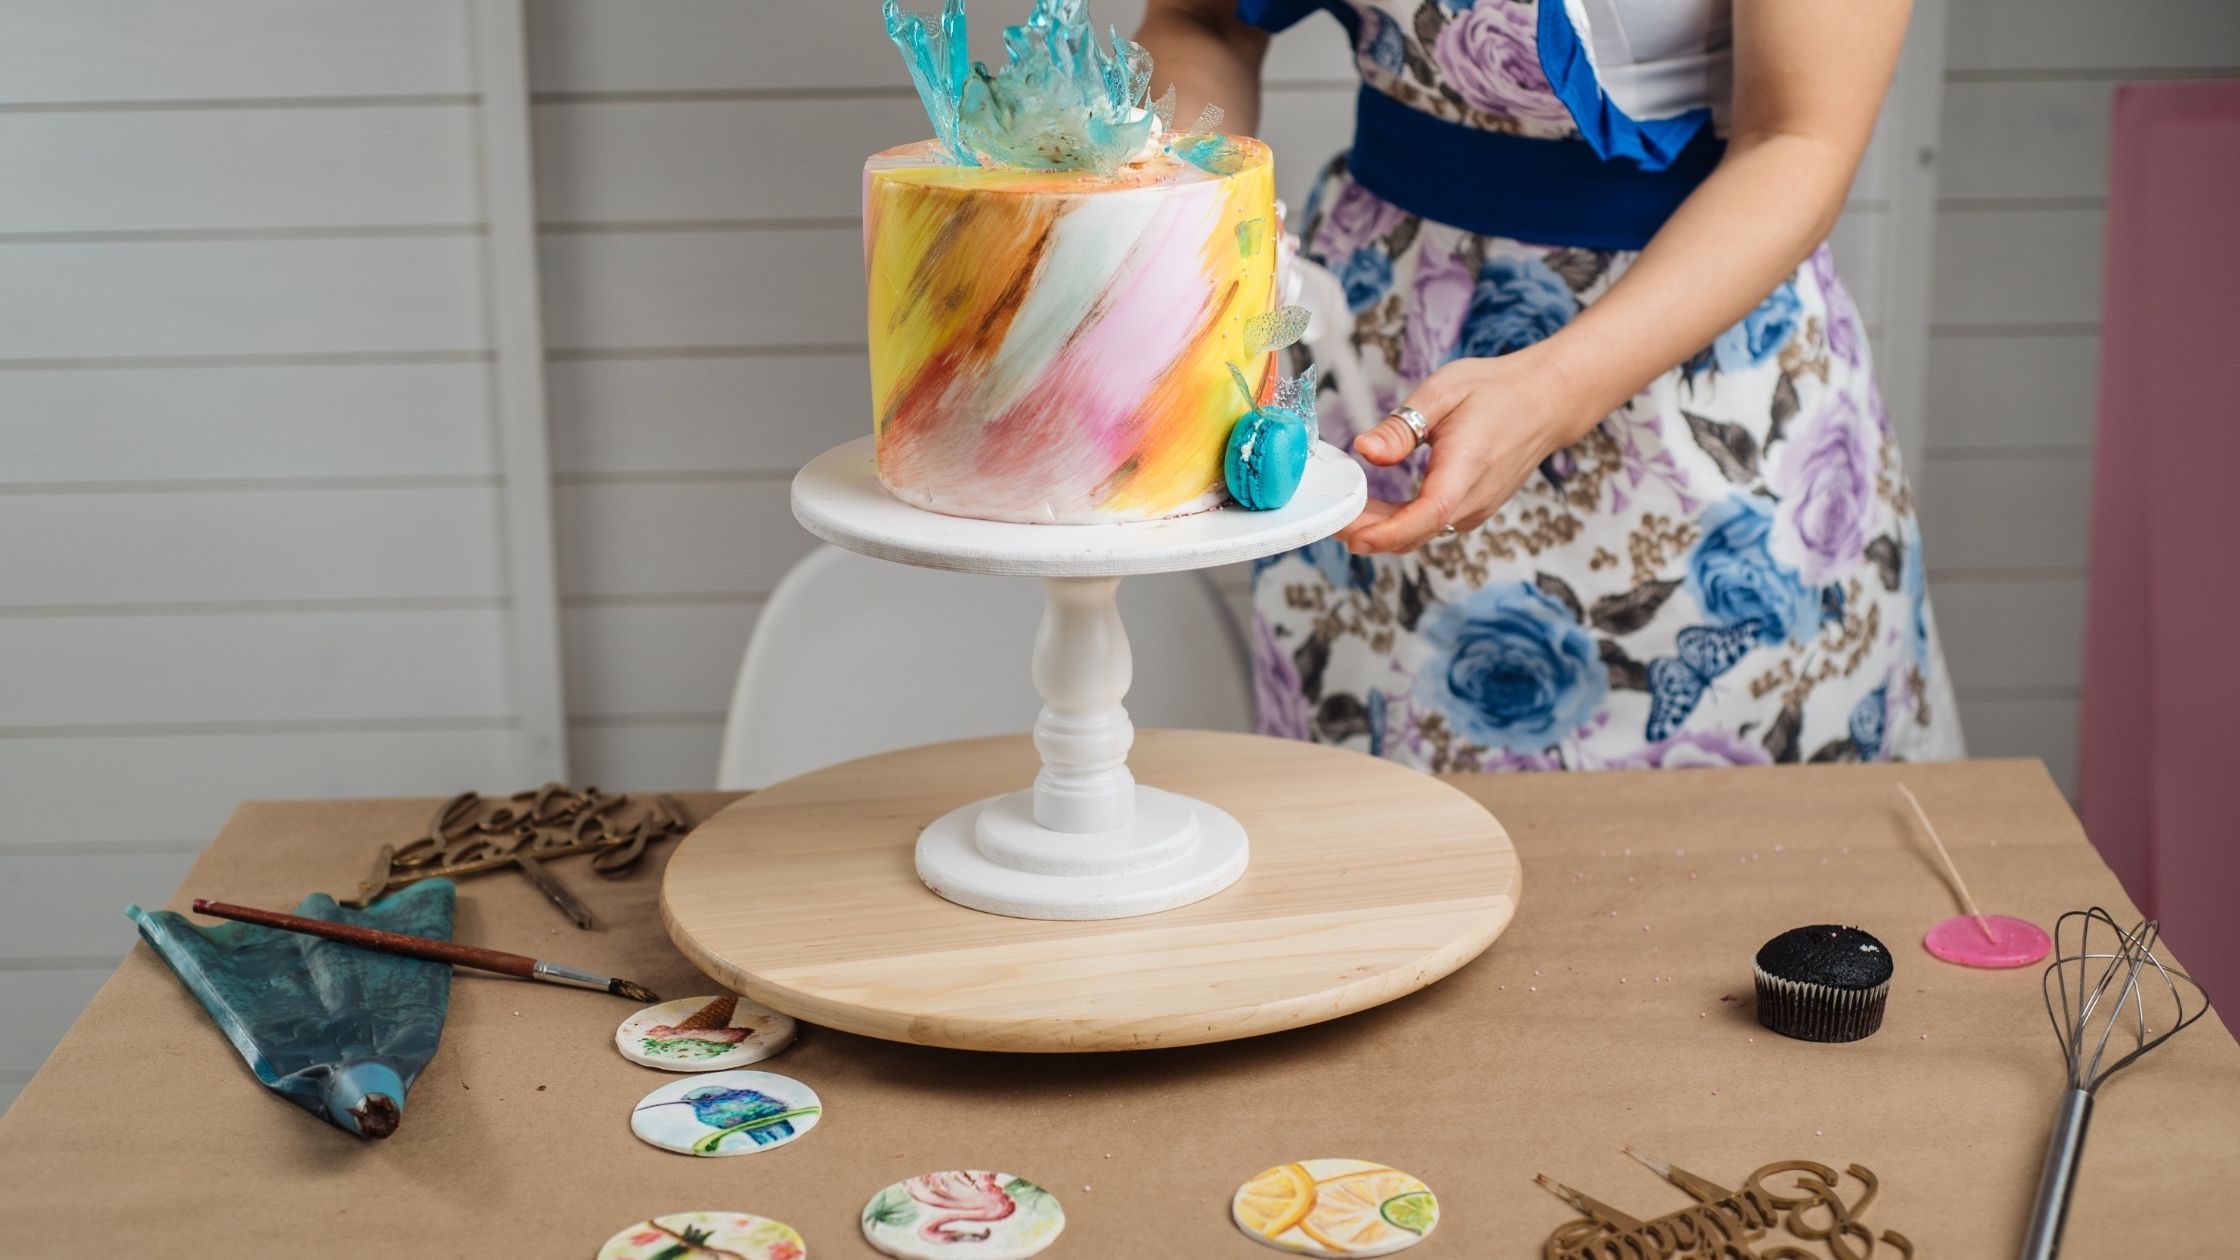 cake making is a profitable home business for a housewife